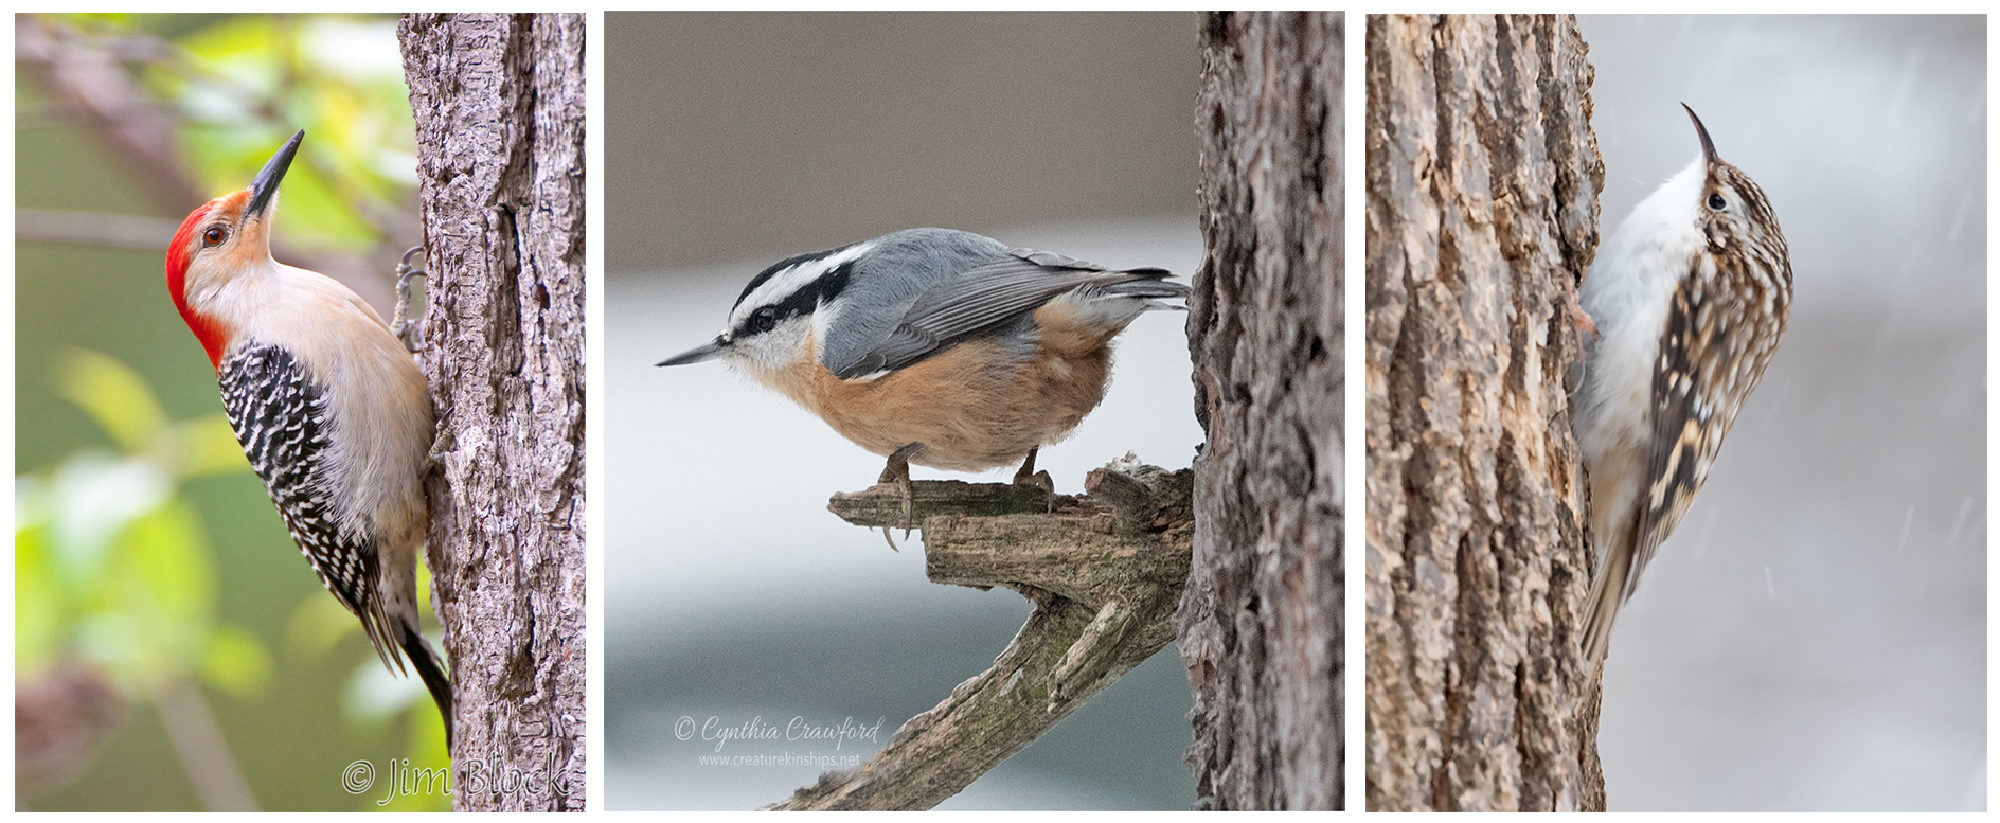 Three resident Norwich species recorded during the 2019 Hanover-Norwich Christmas Bird Count on January 1. From left: Red-bellied Woodpecker (© Jim Block), Red-breasted Nuthatch (© Cynthia Crawford), Brown Creeper (© Cynthia Crawford) 